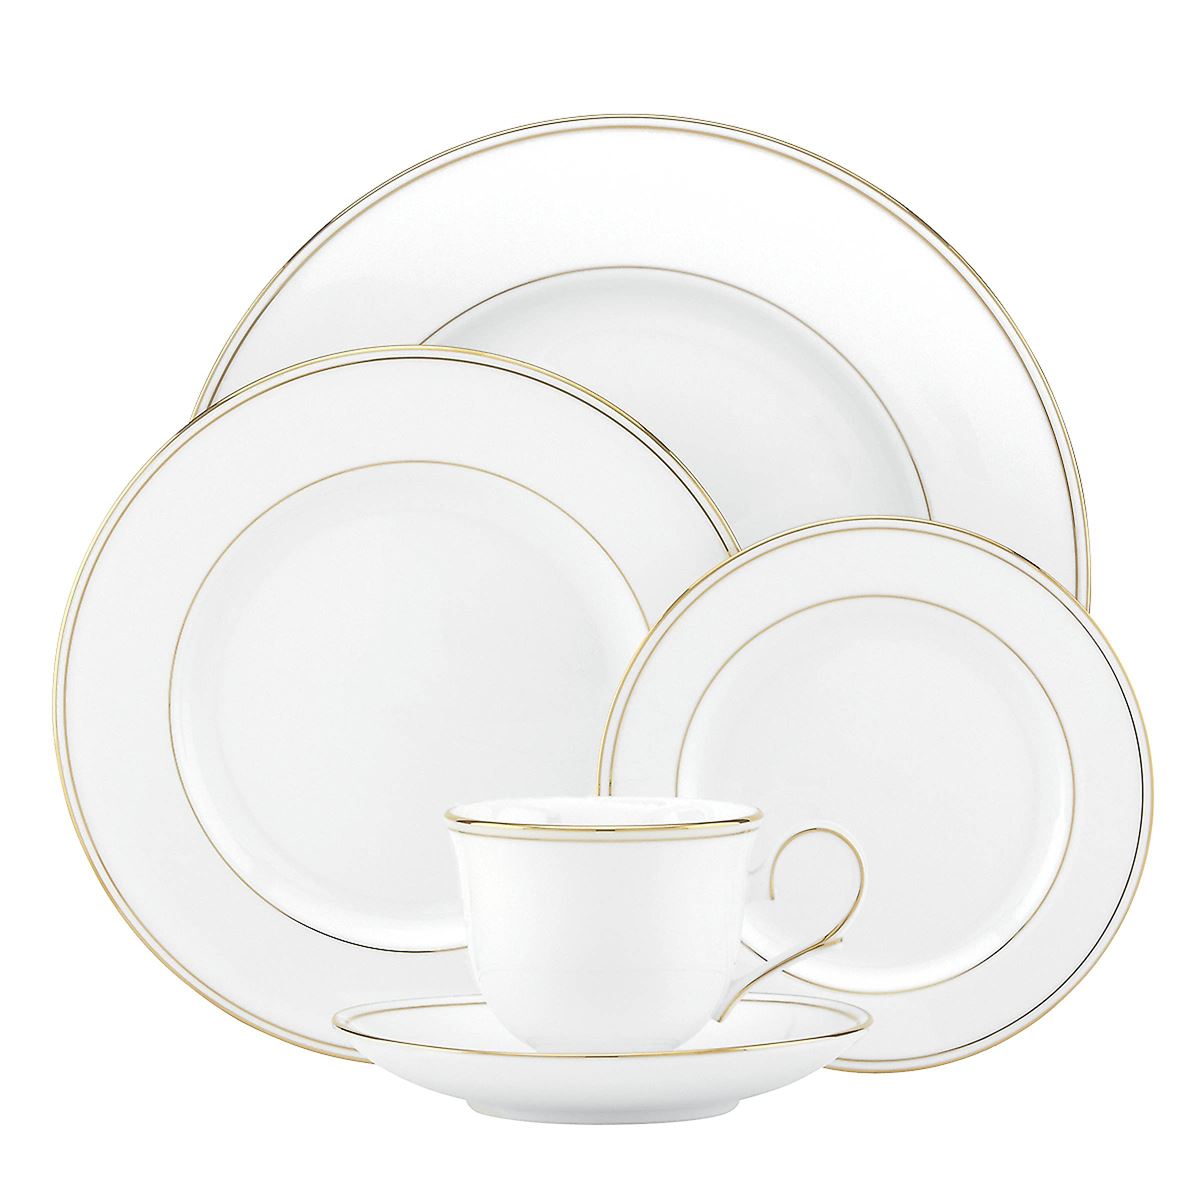 Marchesa By Lenox(R) Federal Gold(tm) 5pc. Place Setting Set